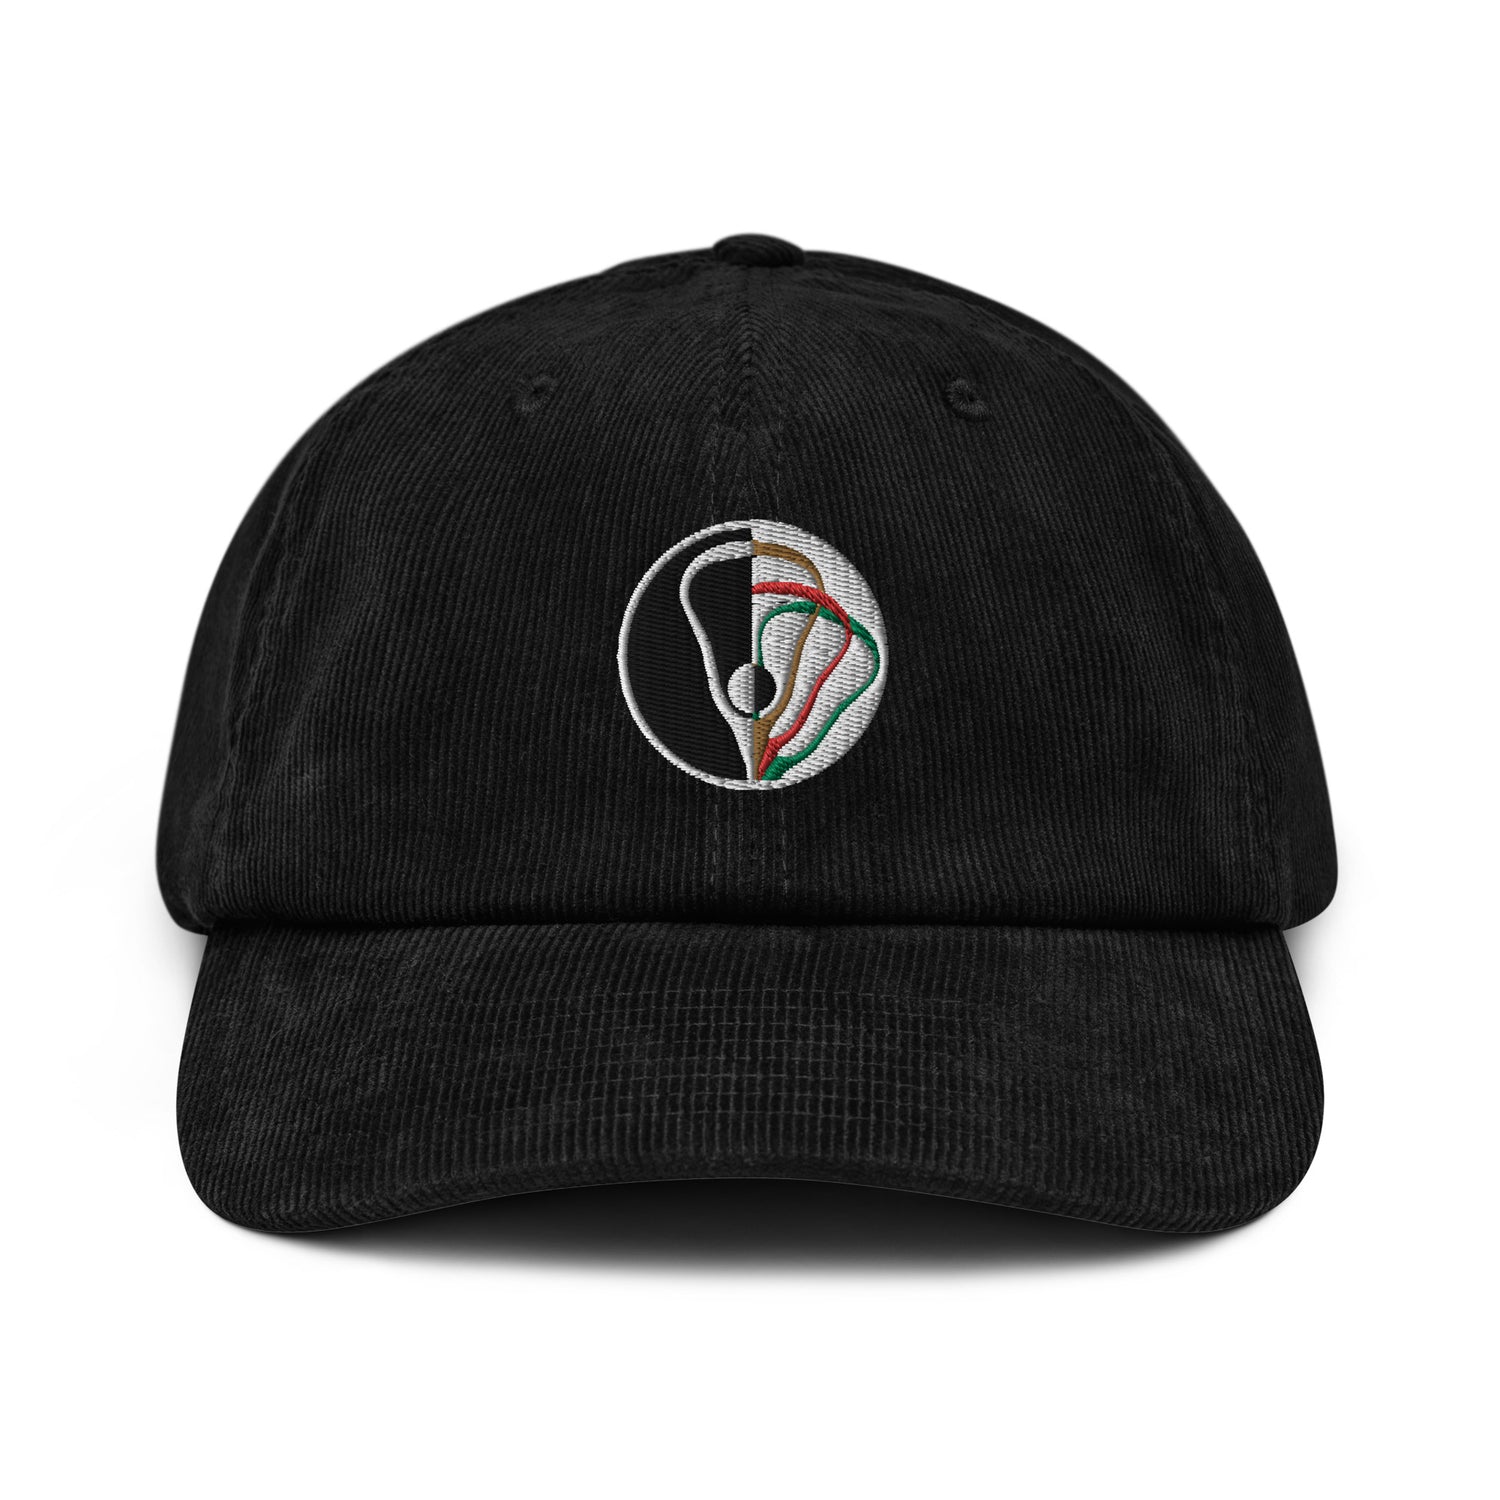 LAX World Faded Heritage Multicolor Lacrosse Hat - Black Front 